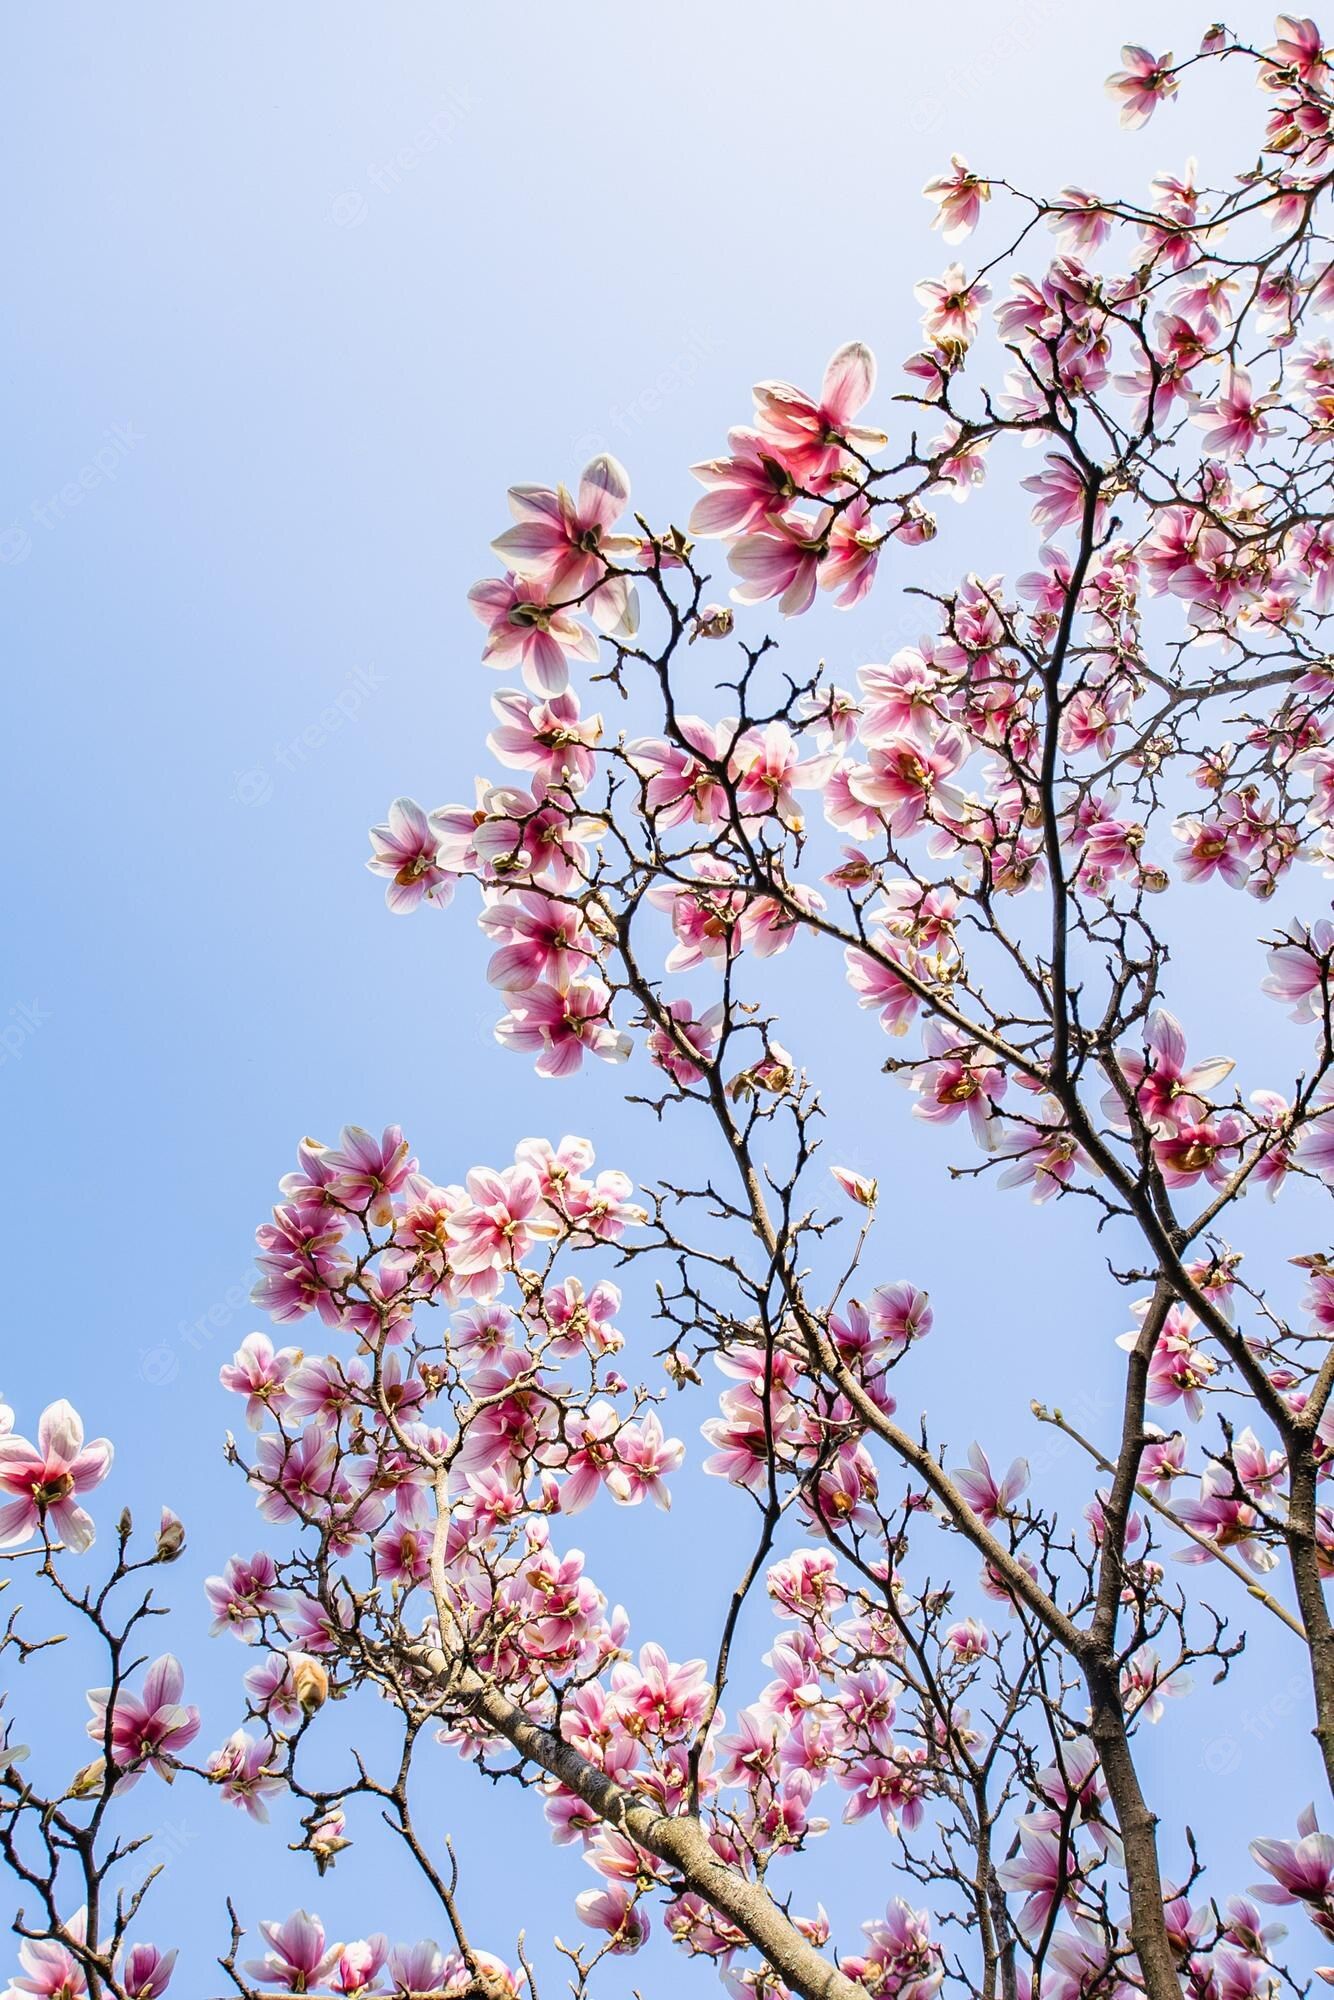 A tree with pink flowers in the sky - Spring